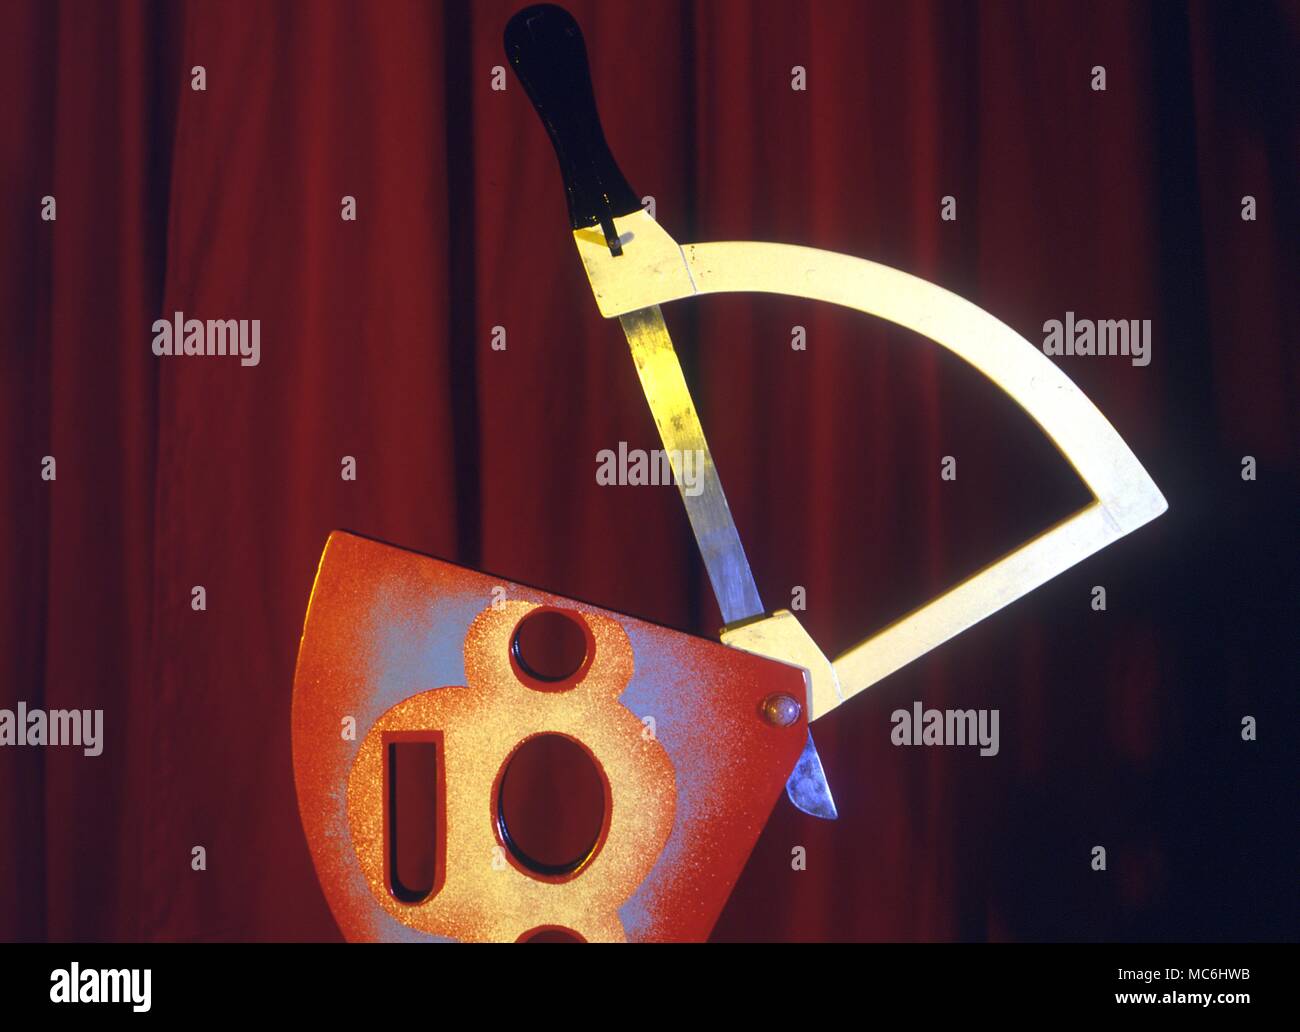 Stage Magic - Cutting off a girl's hand. How the guillotine looks without the blade retracted. Stock Photo